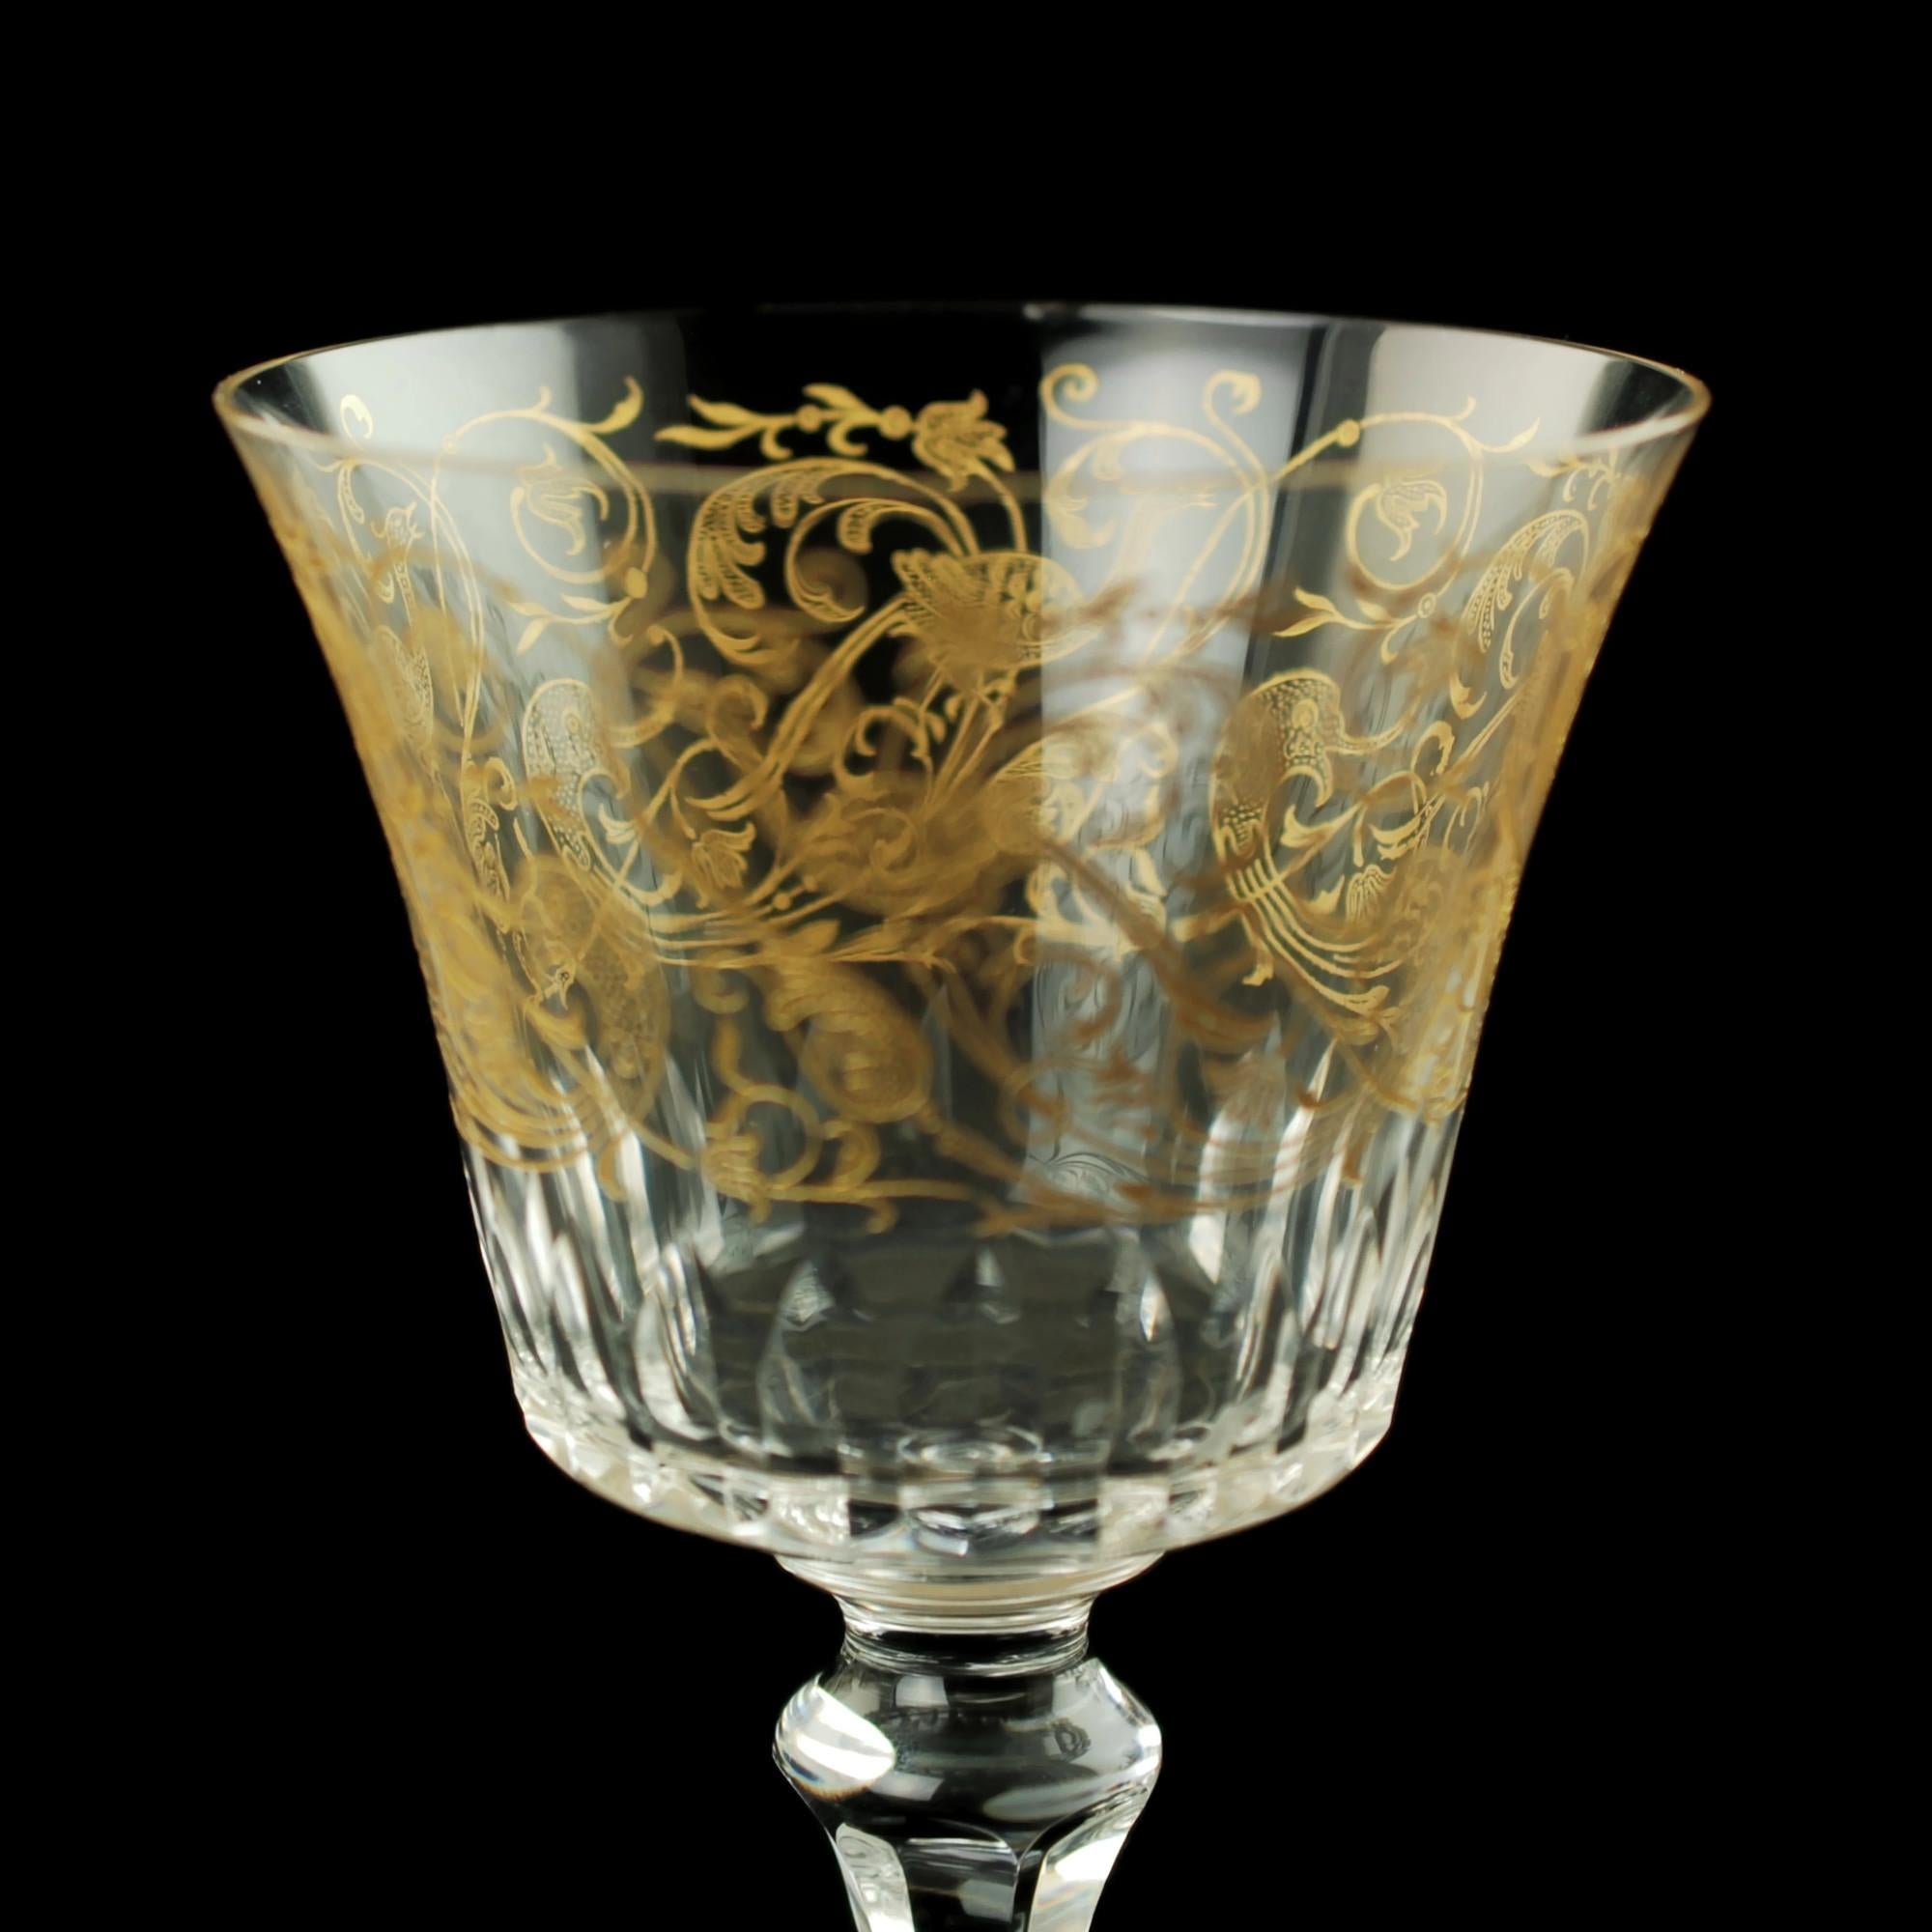 Baccarat Bergame Parme Gilt Etched Crystal Glasses with Paneled Stems Set of 16 For Sale 7